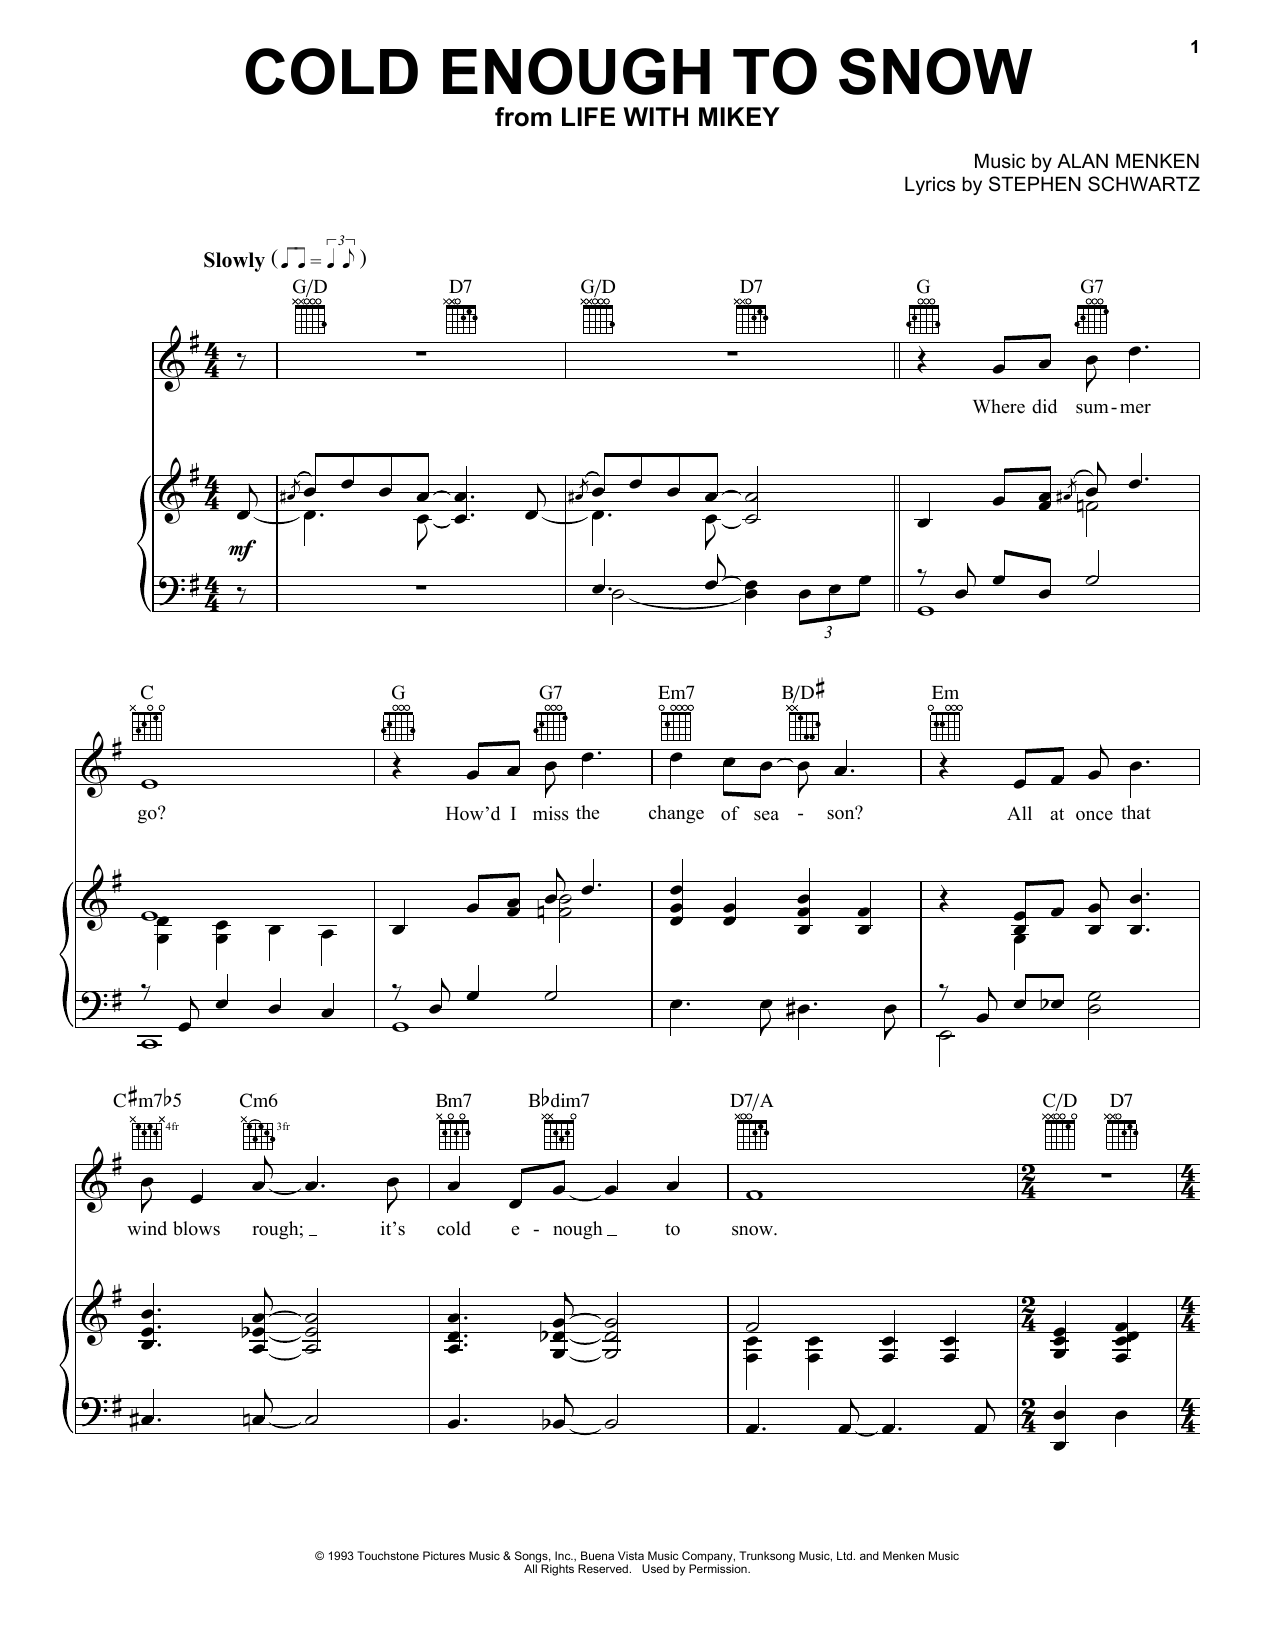 Alan Menken Cold Enough To Snow (from Life With Mikey) sheet music notes and chords. Download Printable PDF.